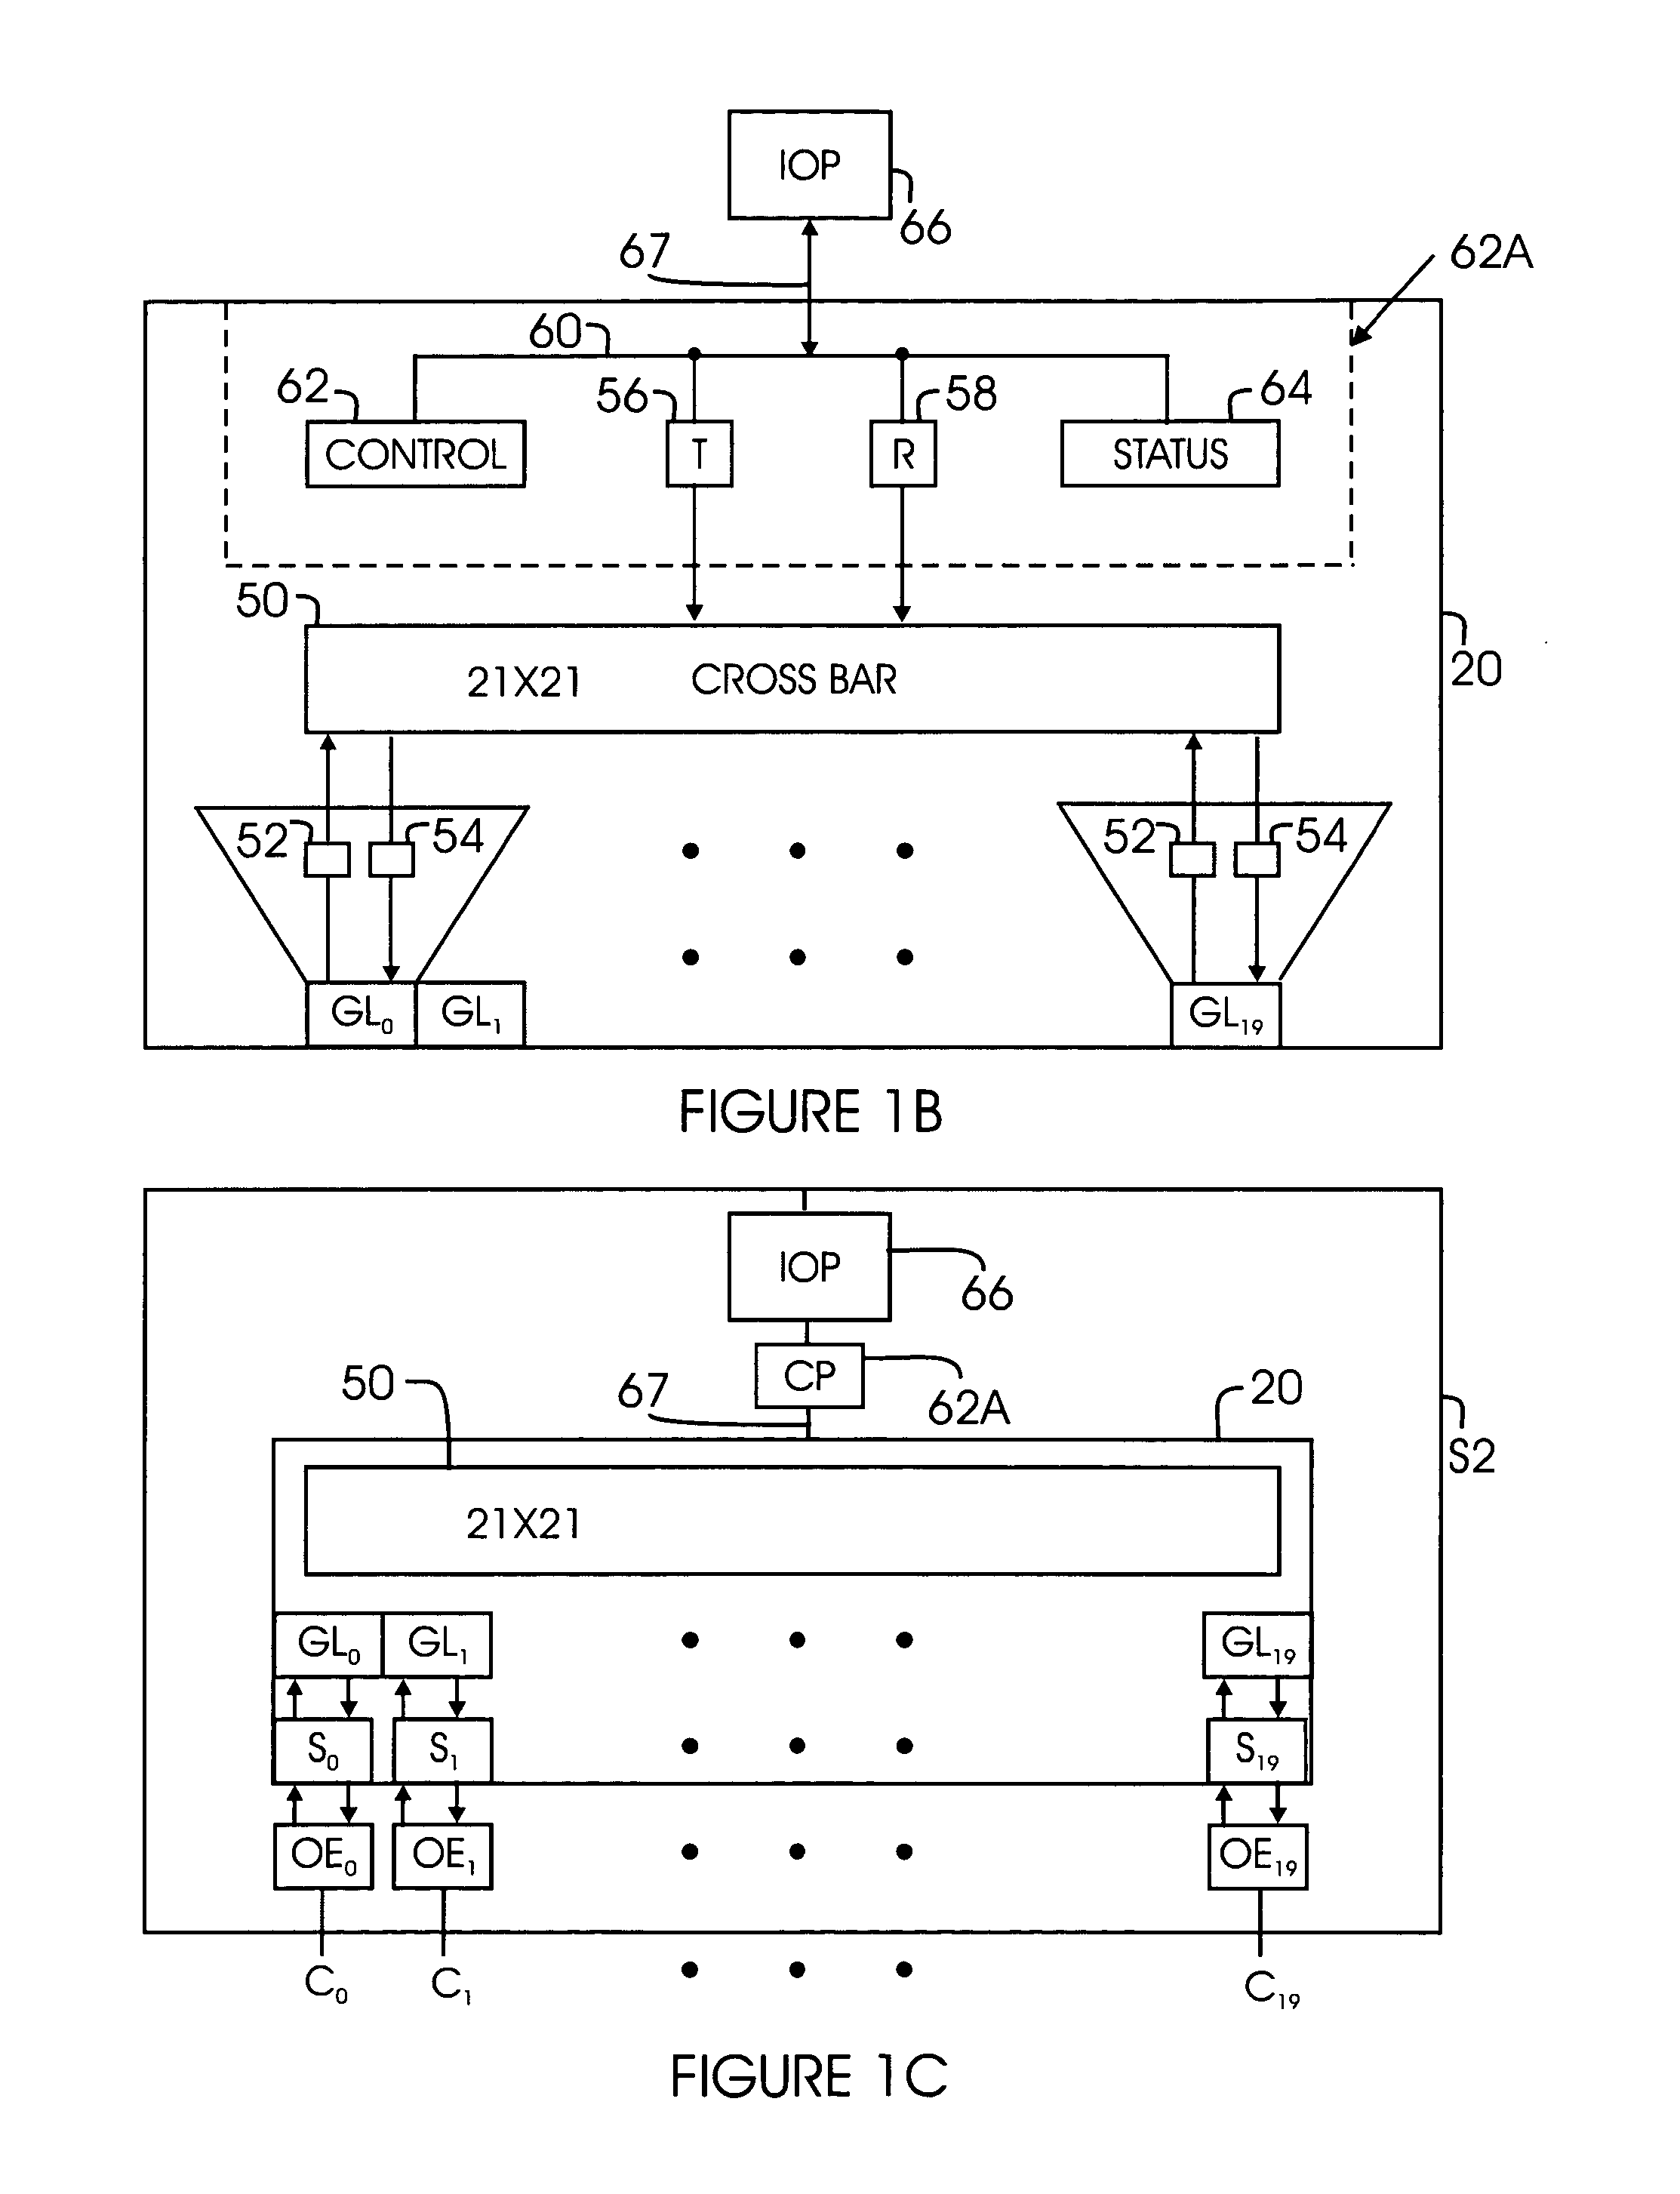 Method and system for congestion control based on optimum bandwidth allocation in a fibre channel switch